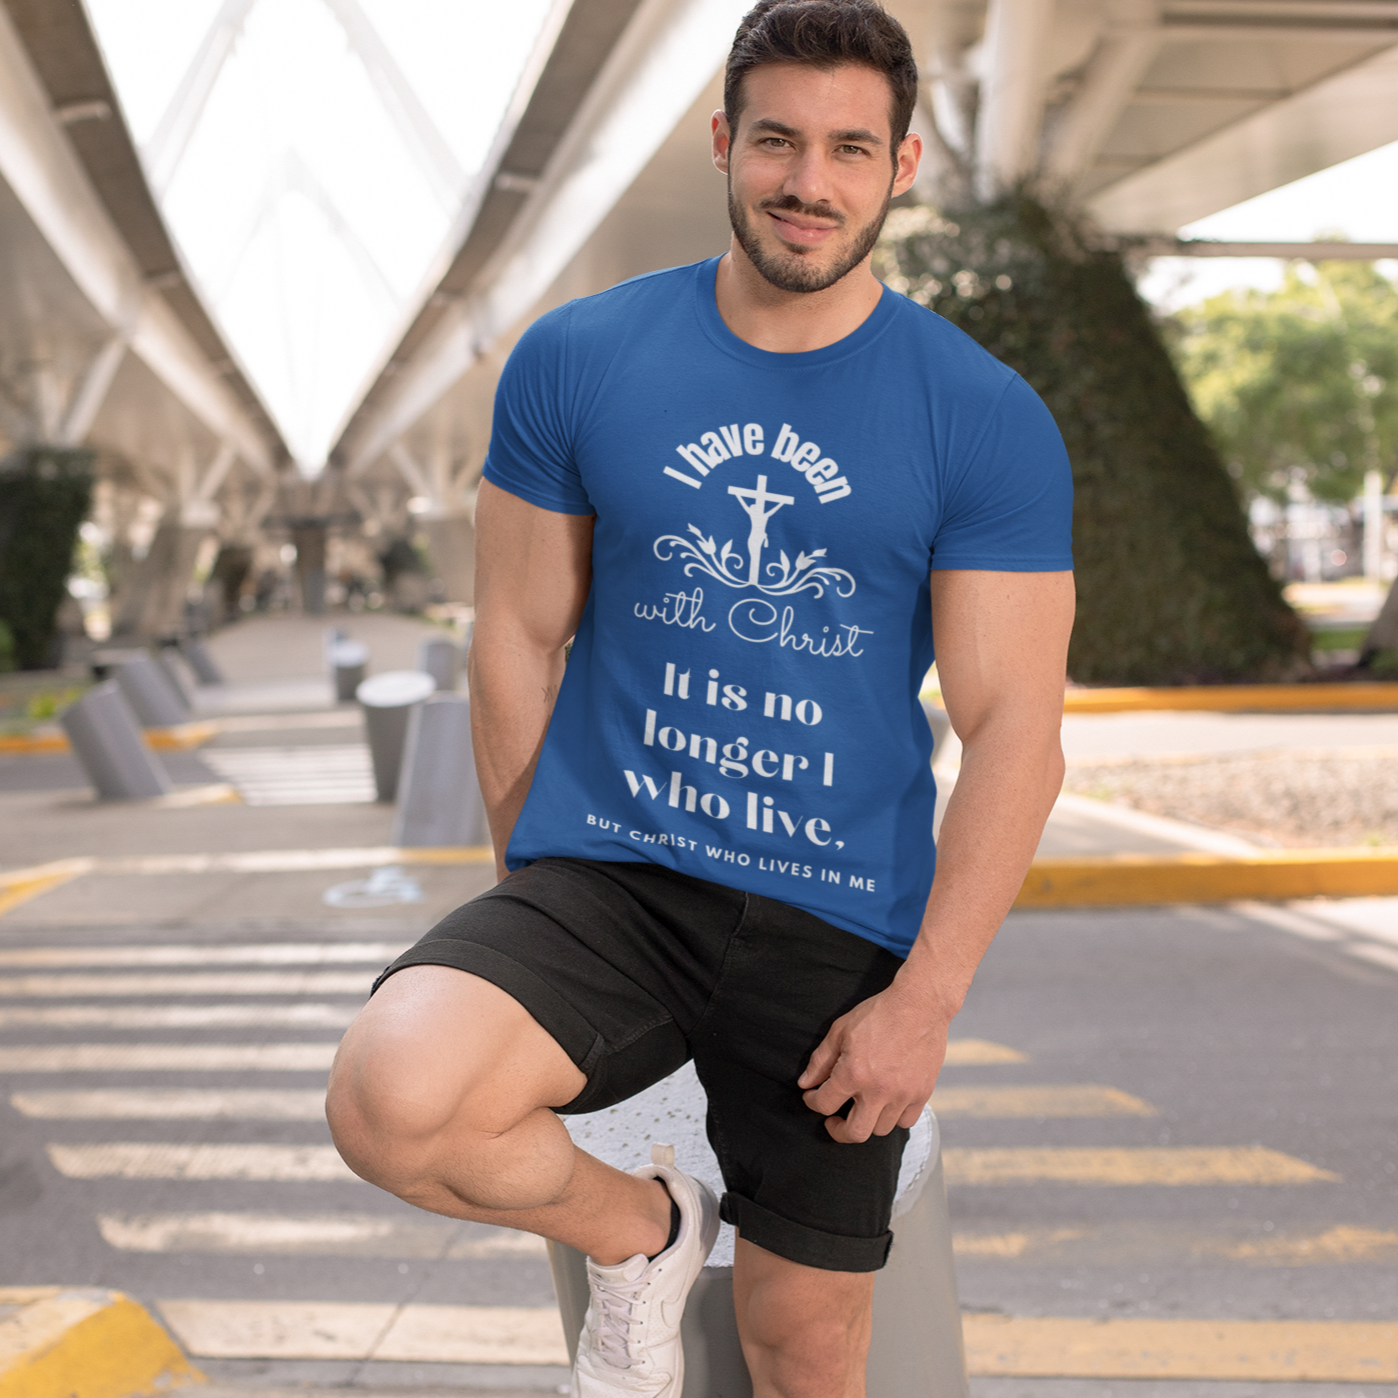 Christian T-shirt| Crucified With Christ | Unisex